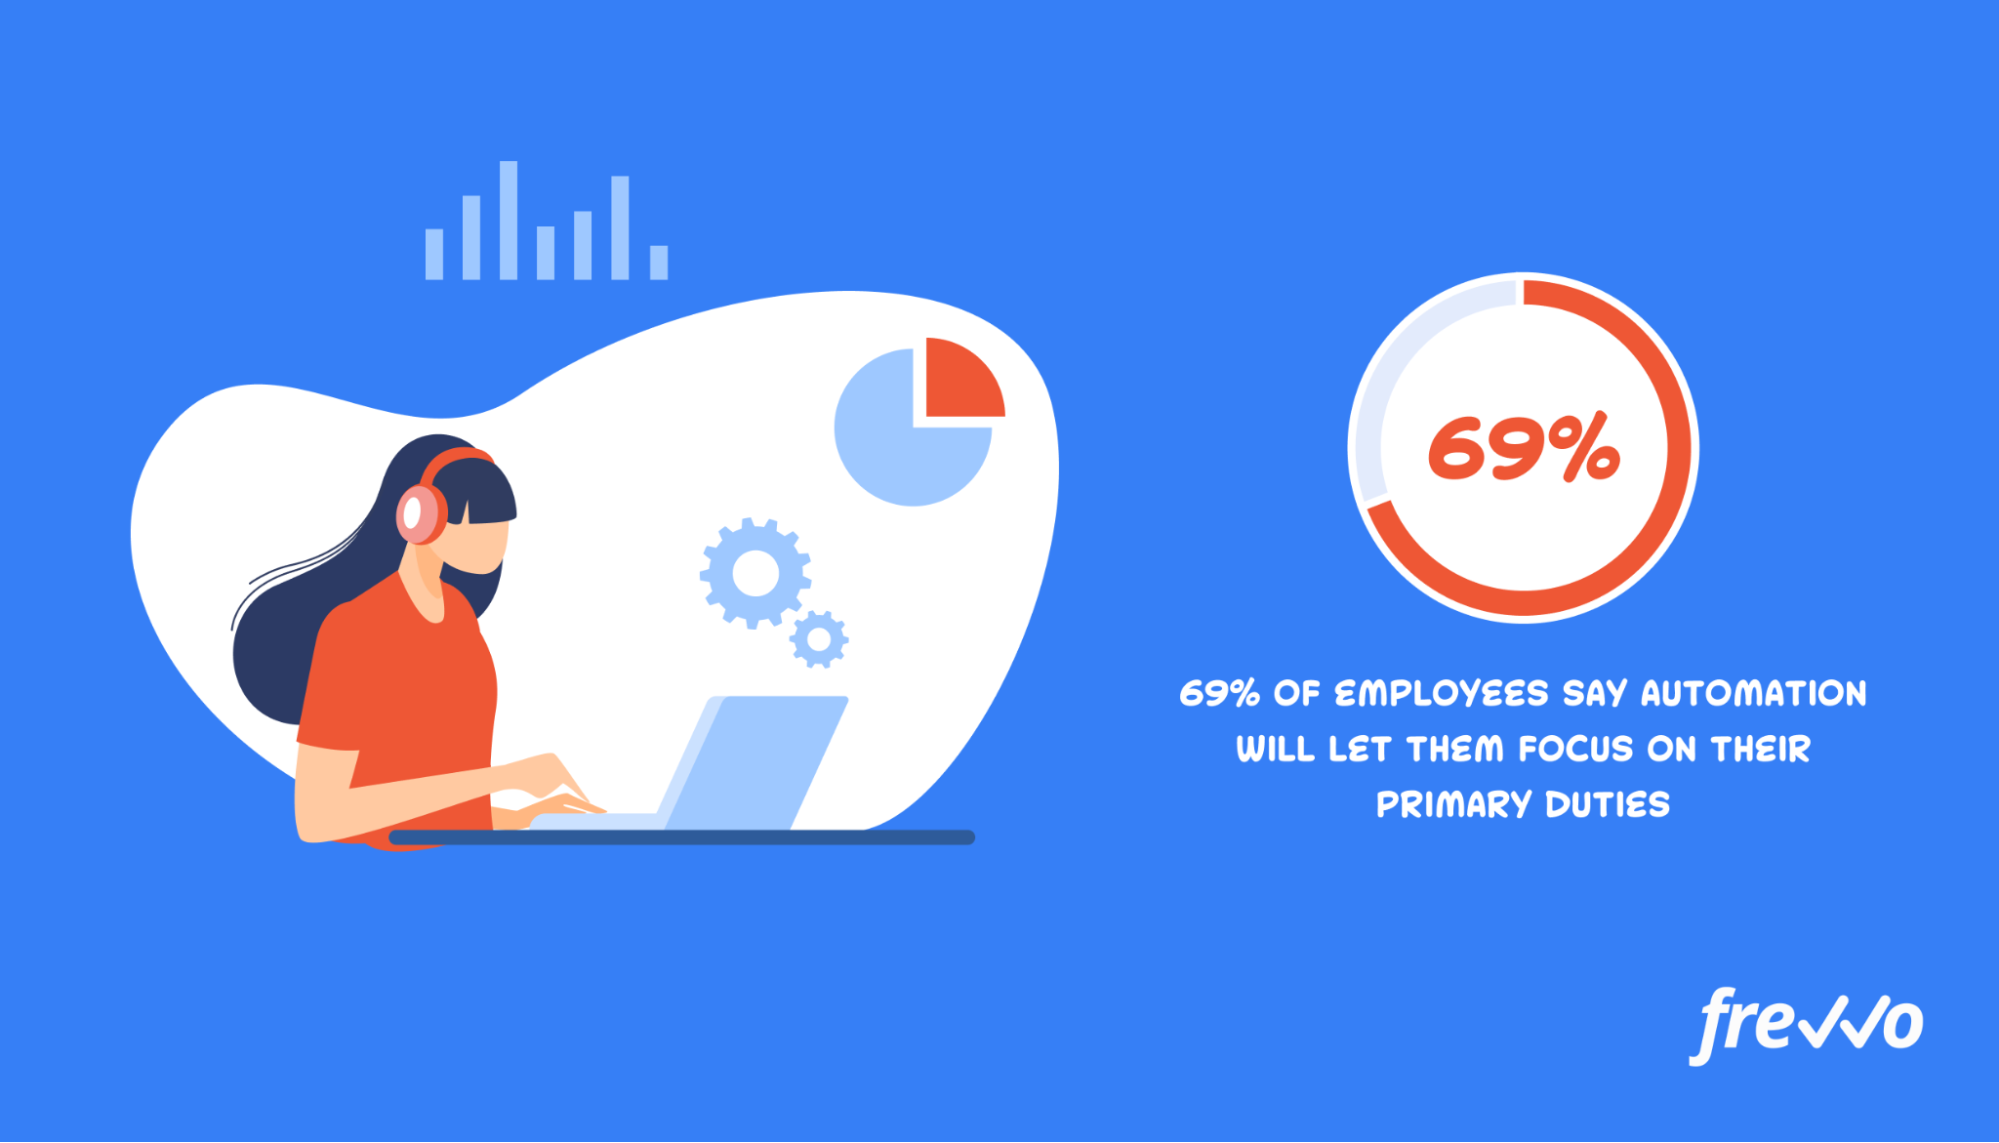 69% of employees say automation will let them focus on their primary duties